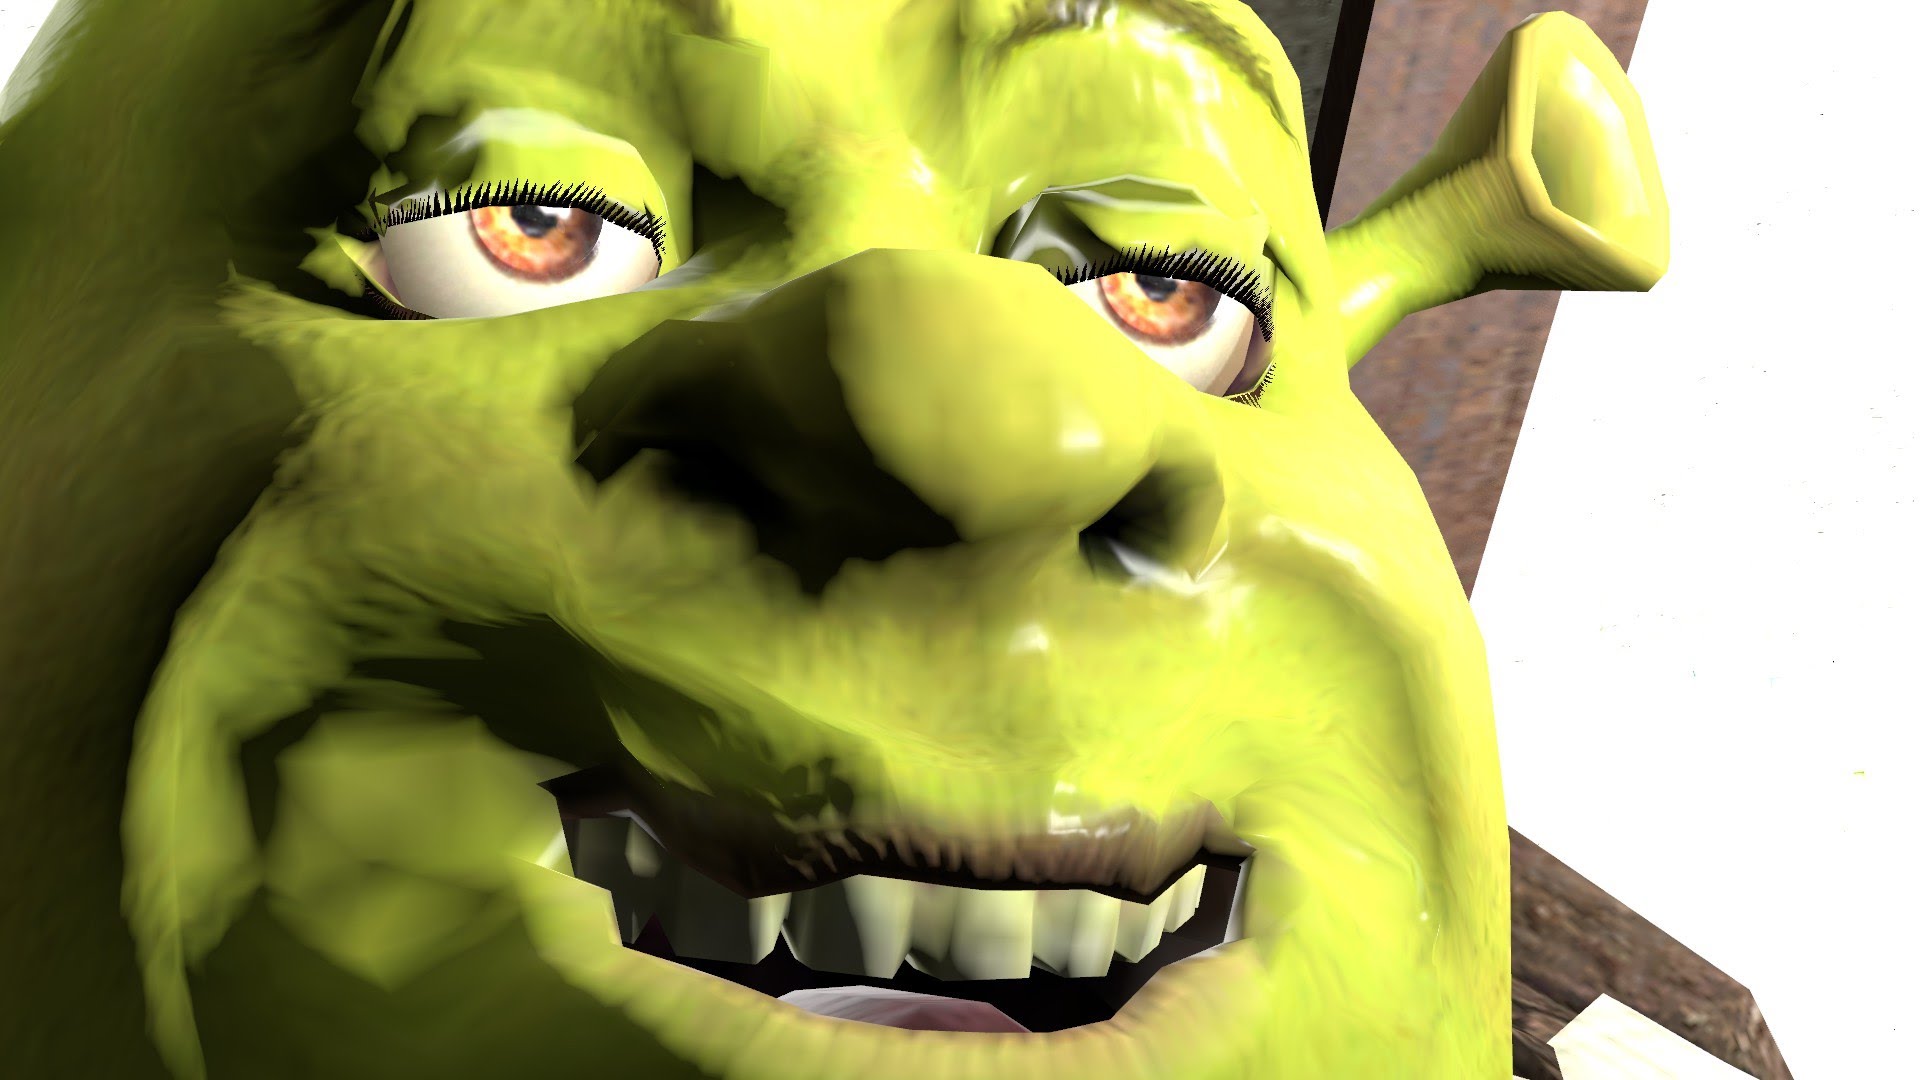 Shrek Extra Large HD Wallpapers and Backgrounds